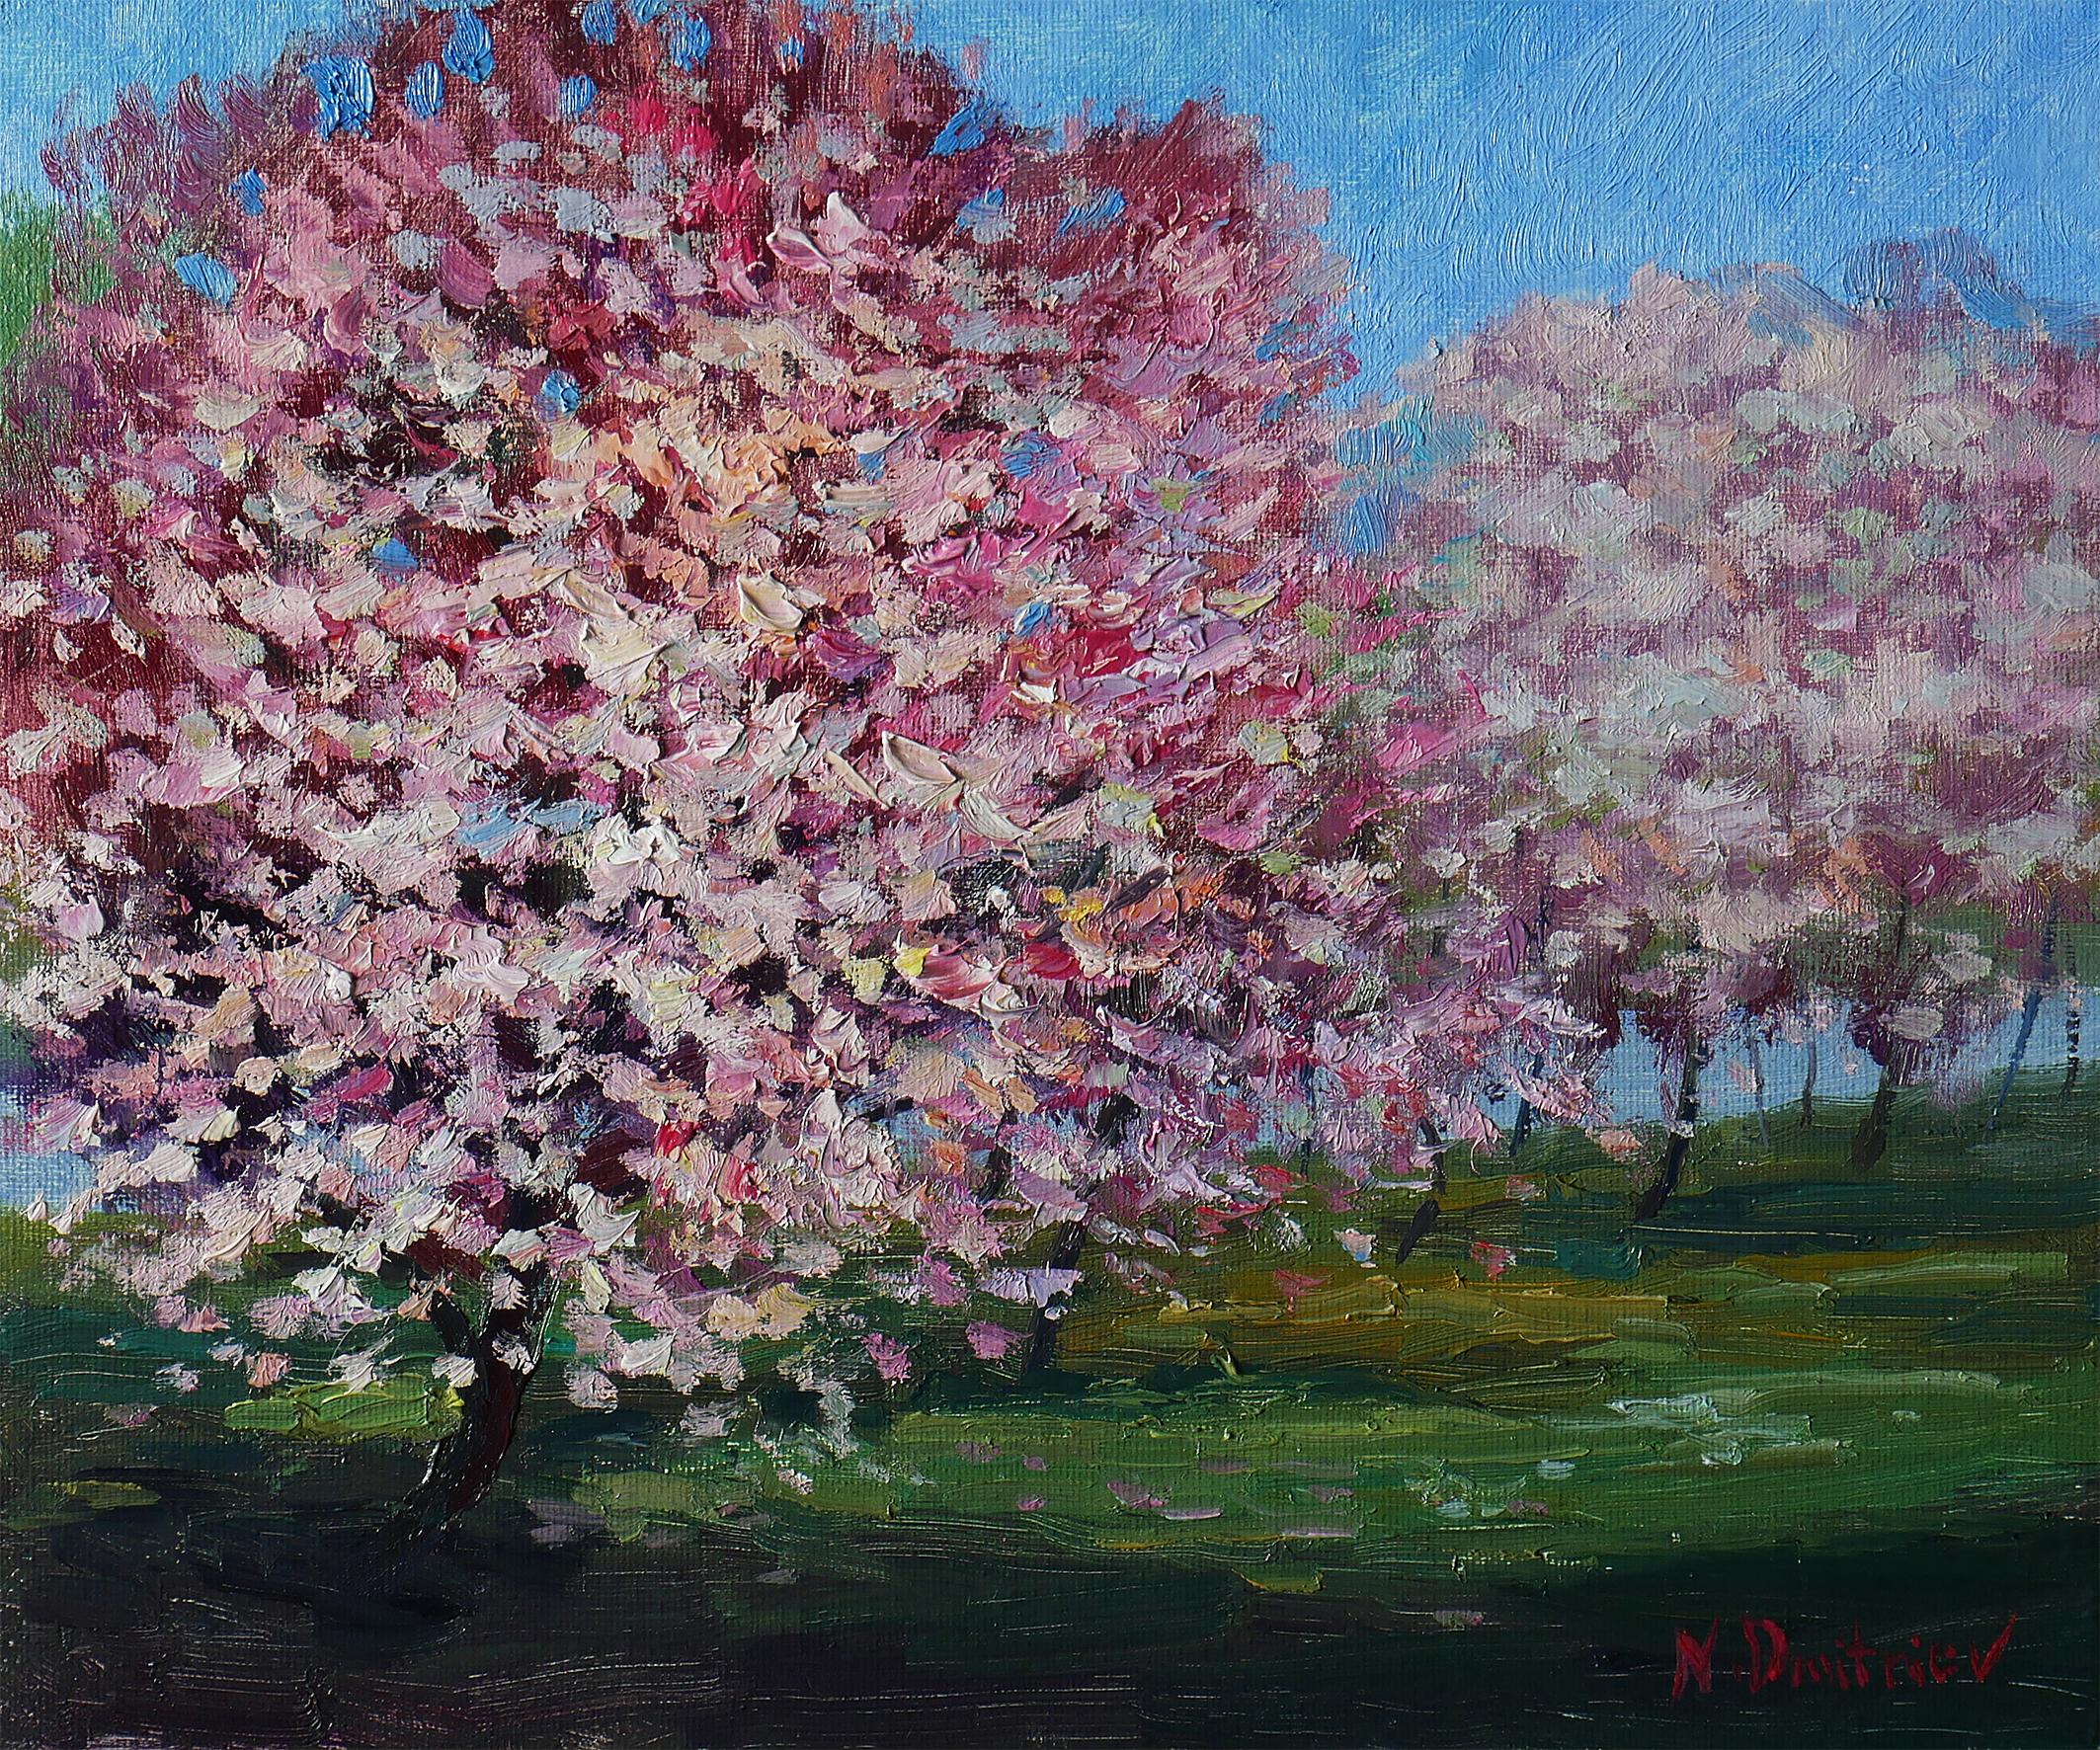 Nikolay Dmitriev Landscape Painting - Blooming Cherry - original sunny landscape, painting